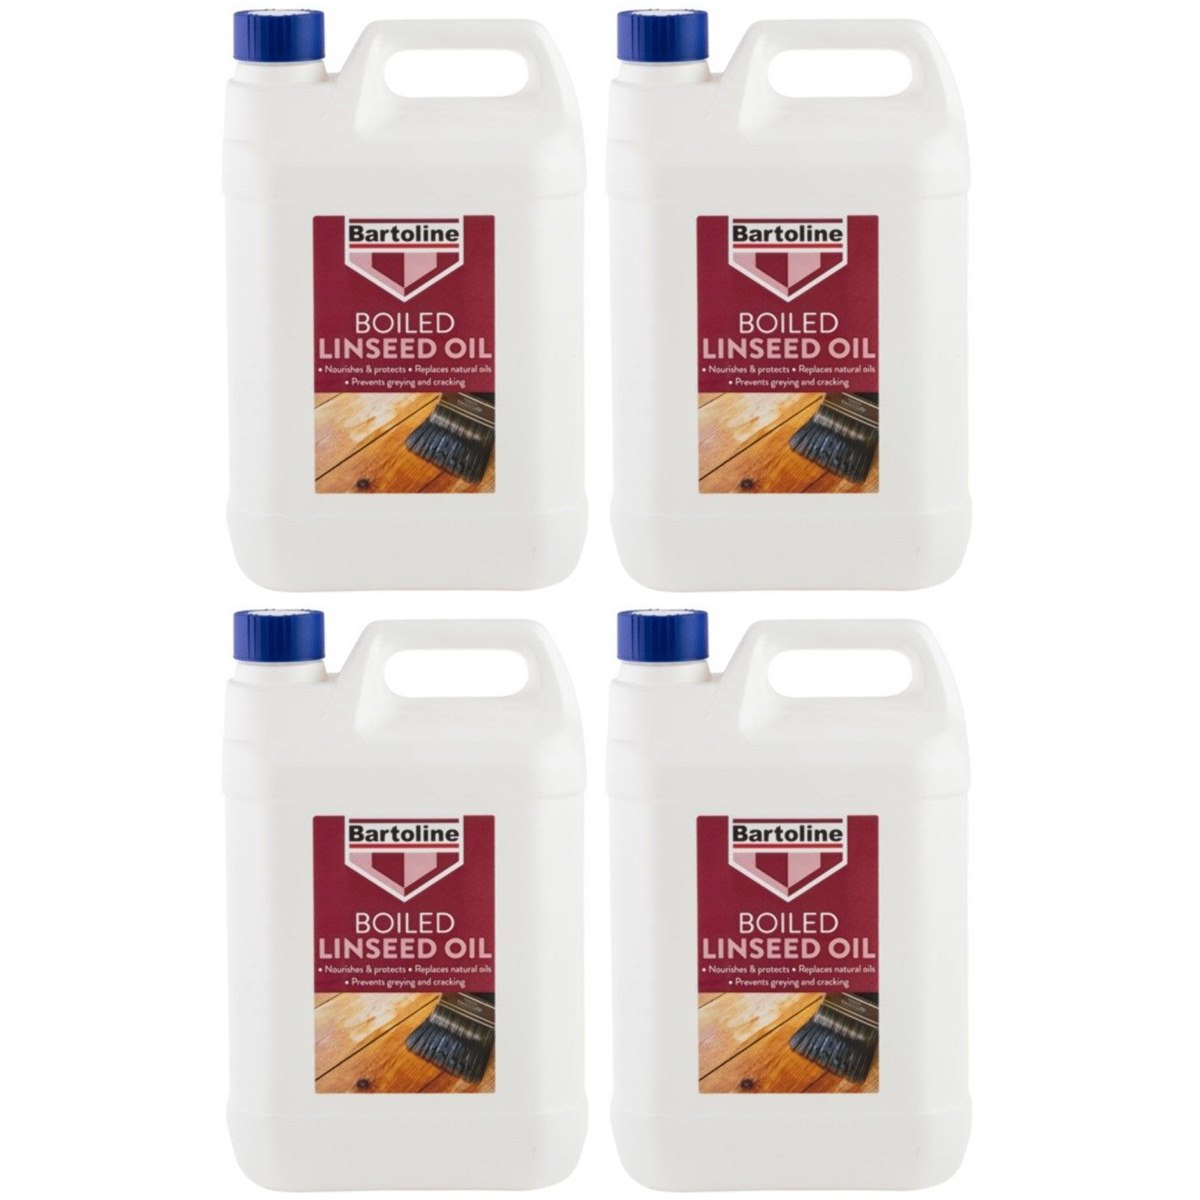 Case of 4 x Bartoline Boiled Linseed Oil 5 Litre